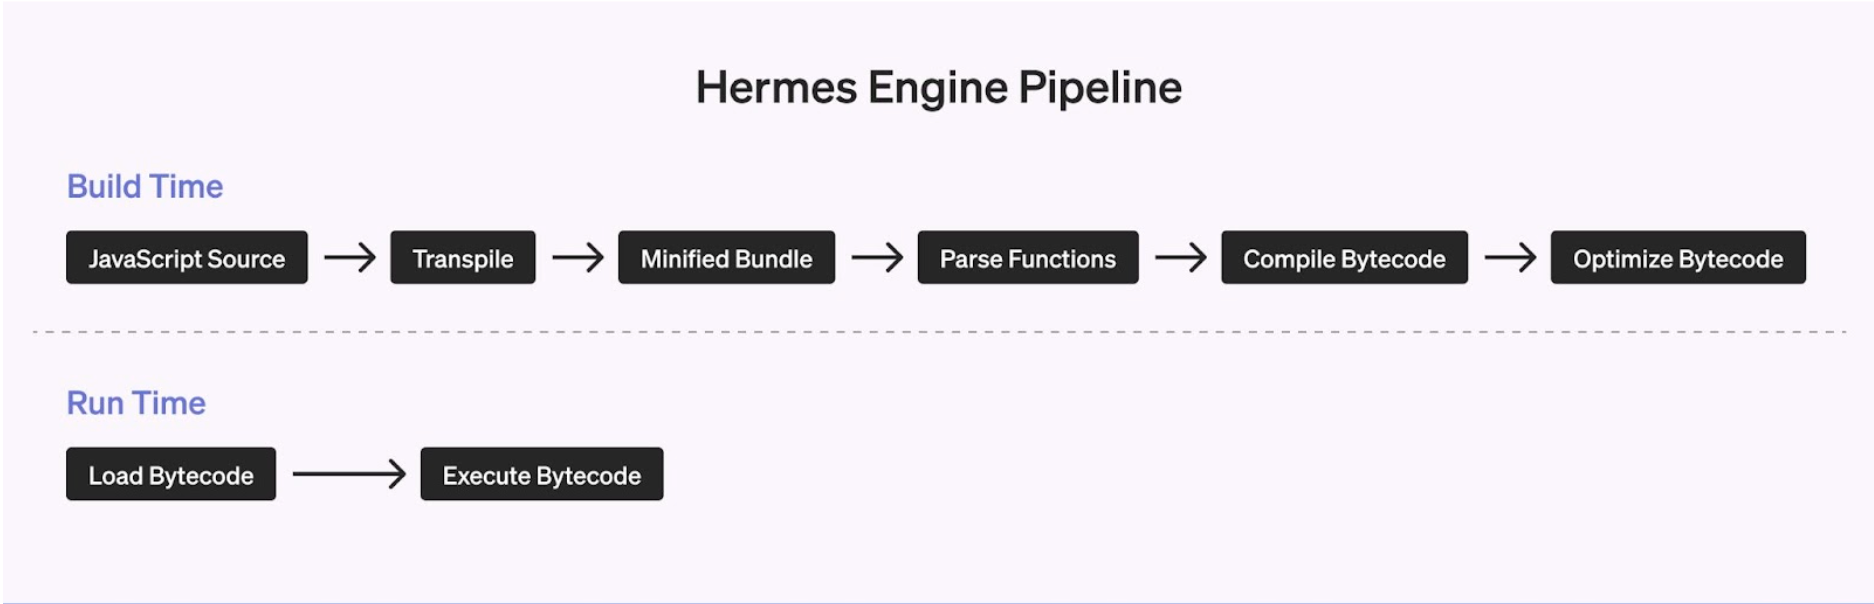 A flow chart titled "Hermes Engine Pipeline"